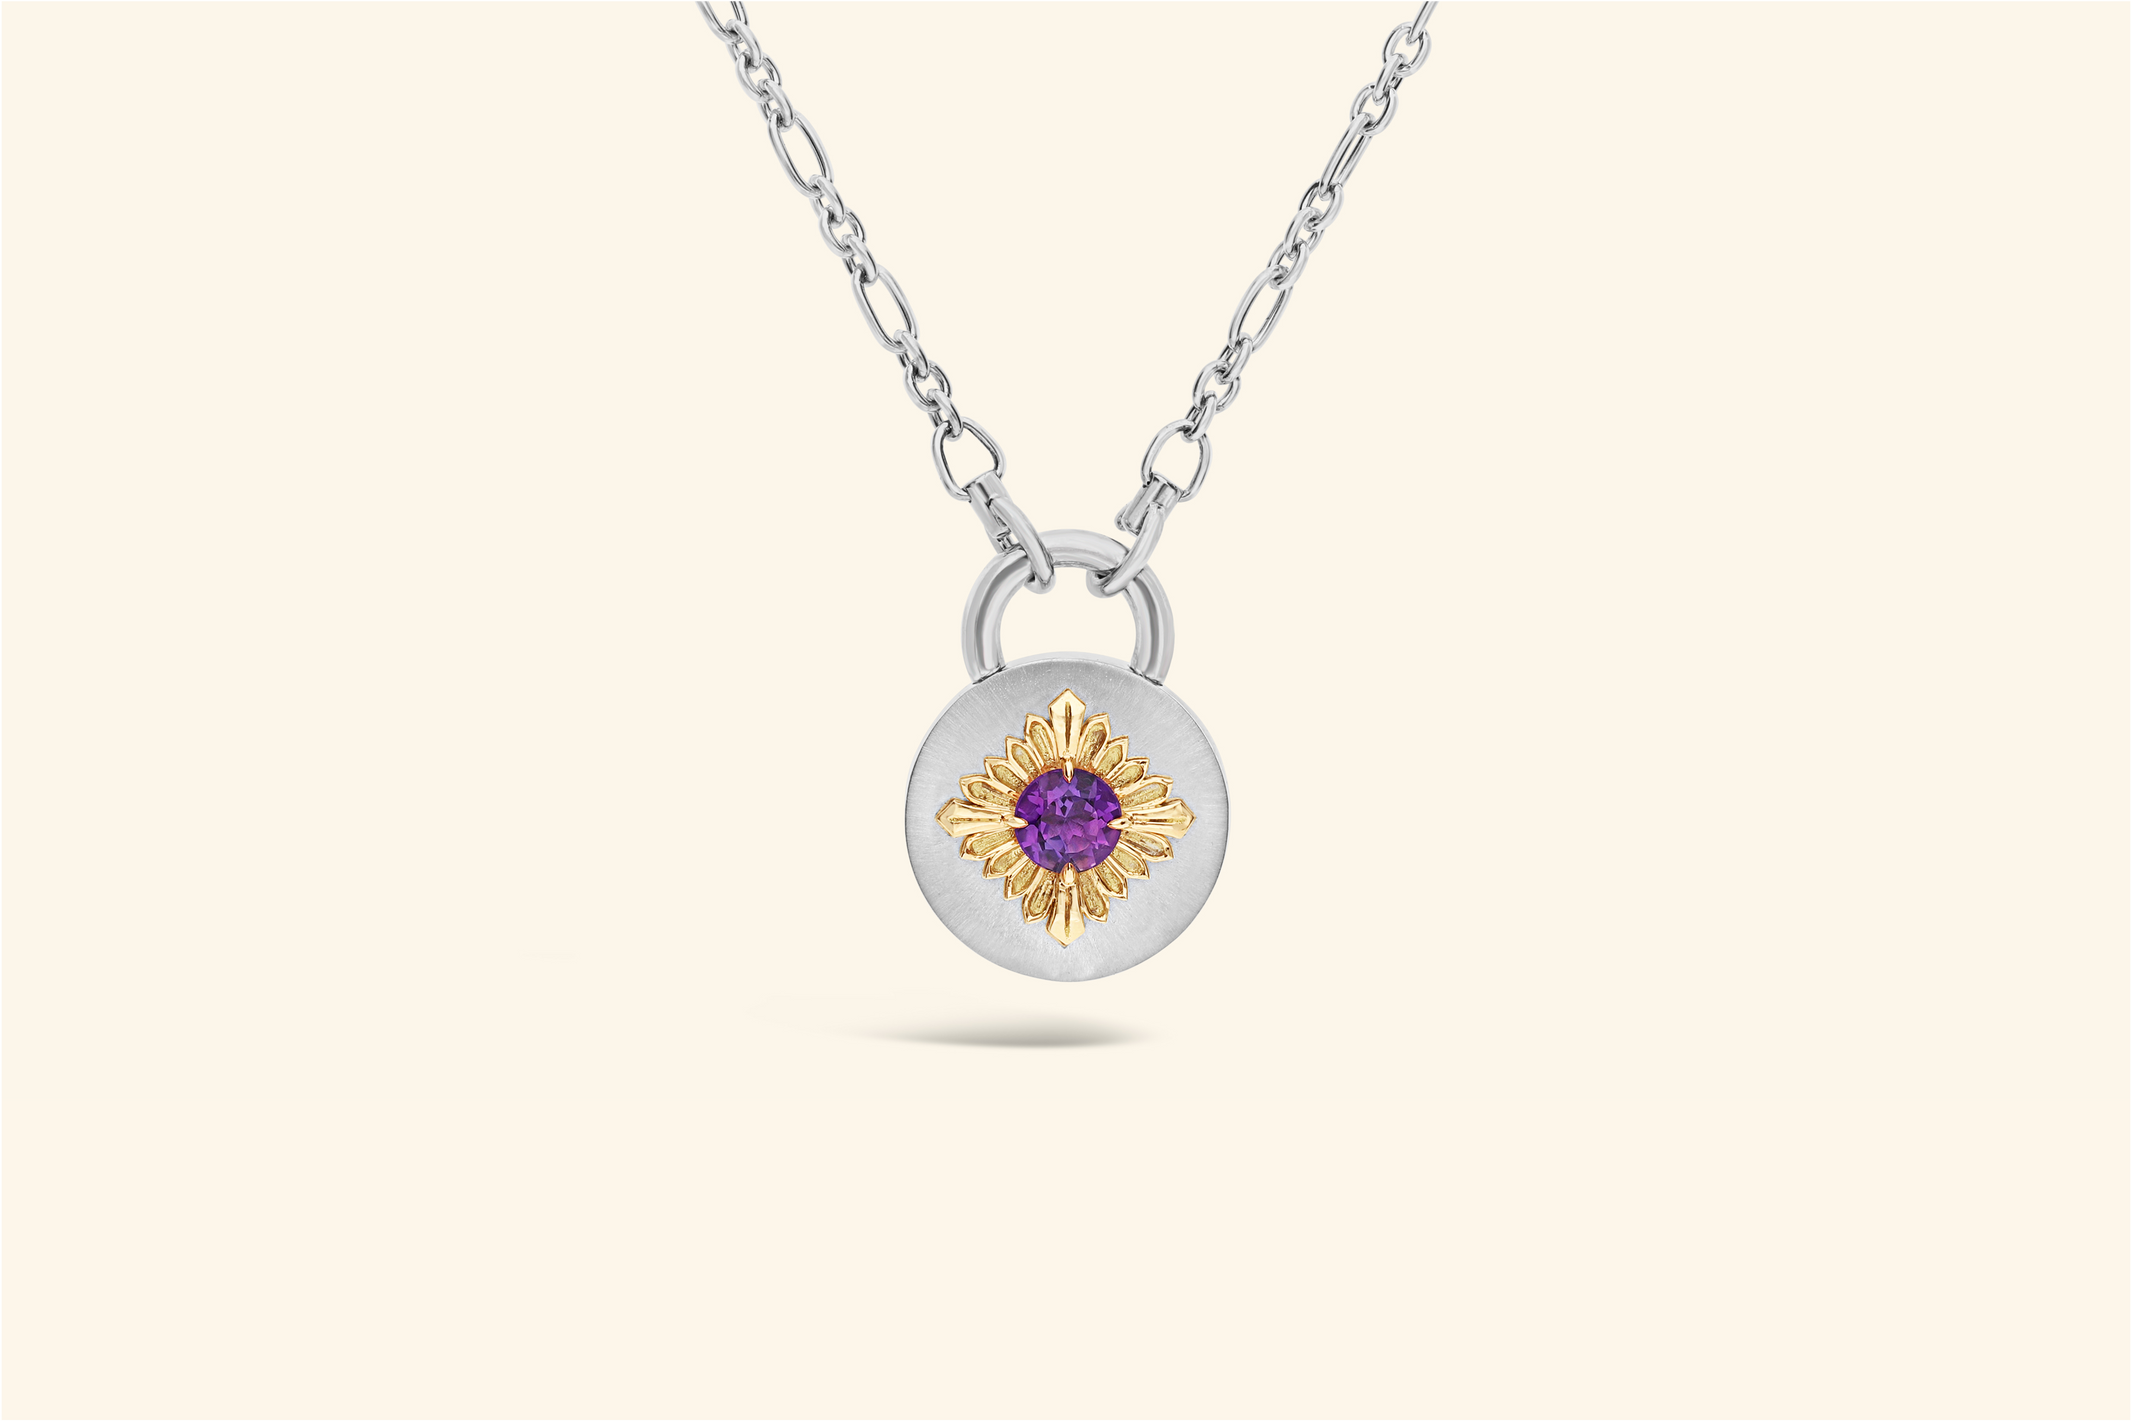 Tag necklace, silver, yellow gold, amethyst